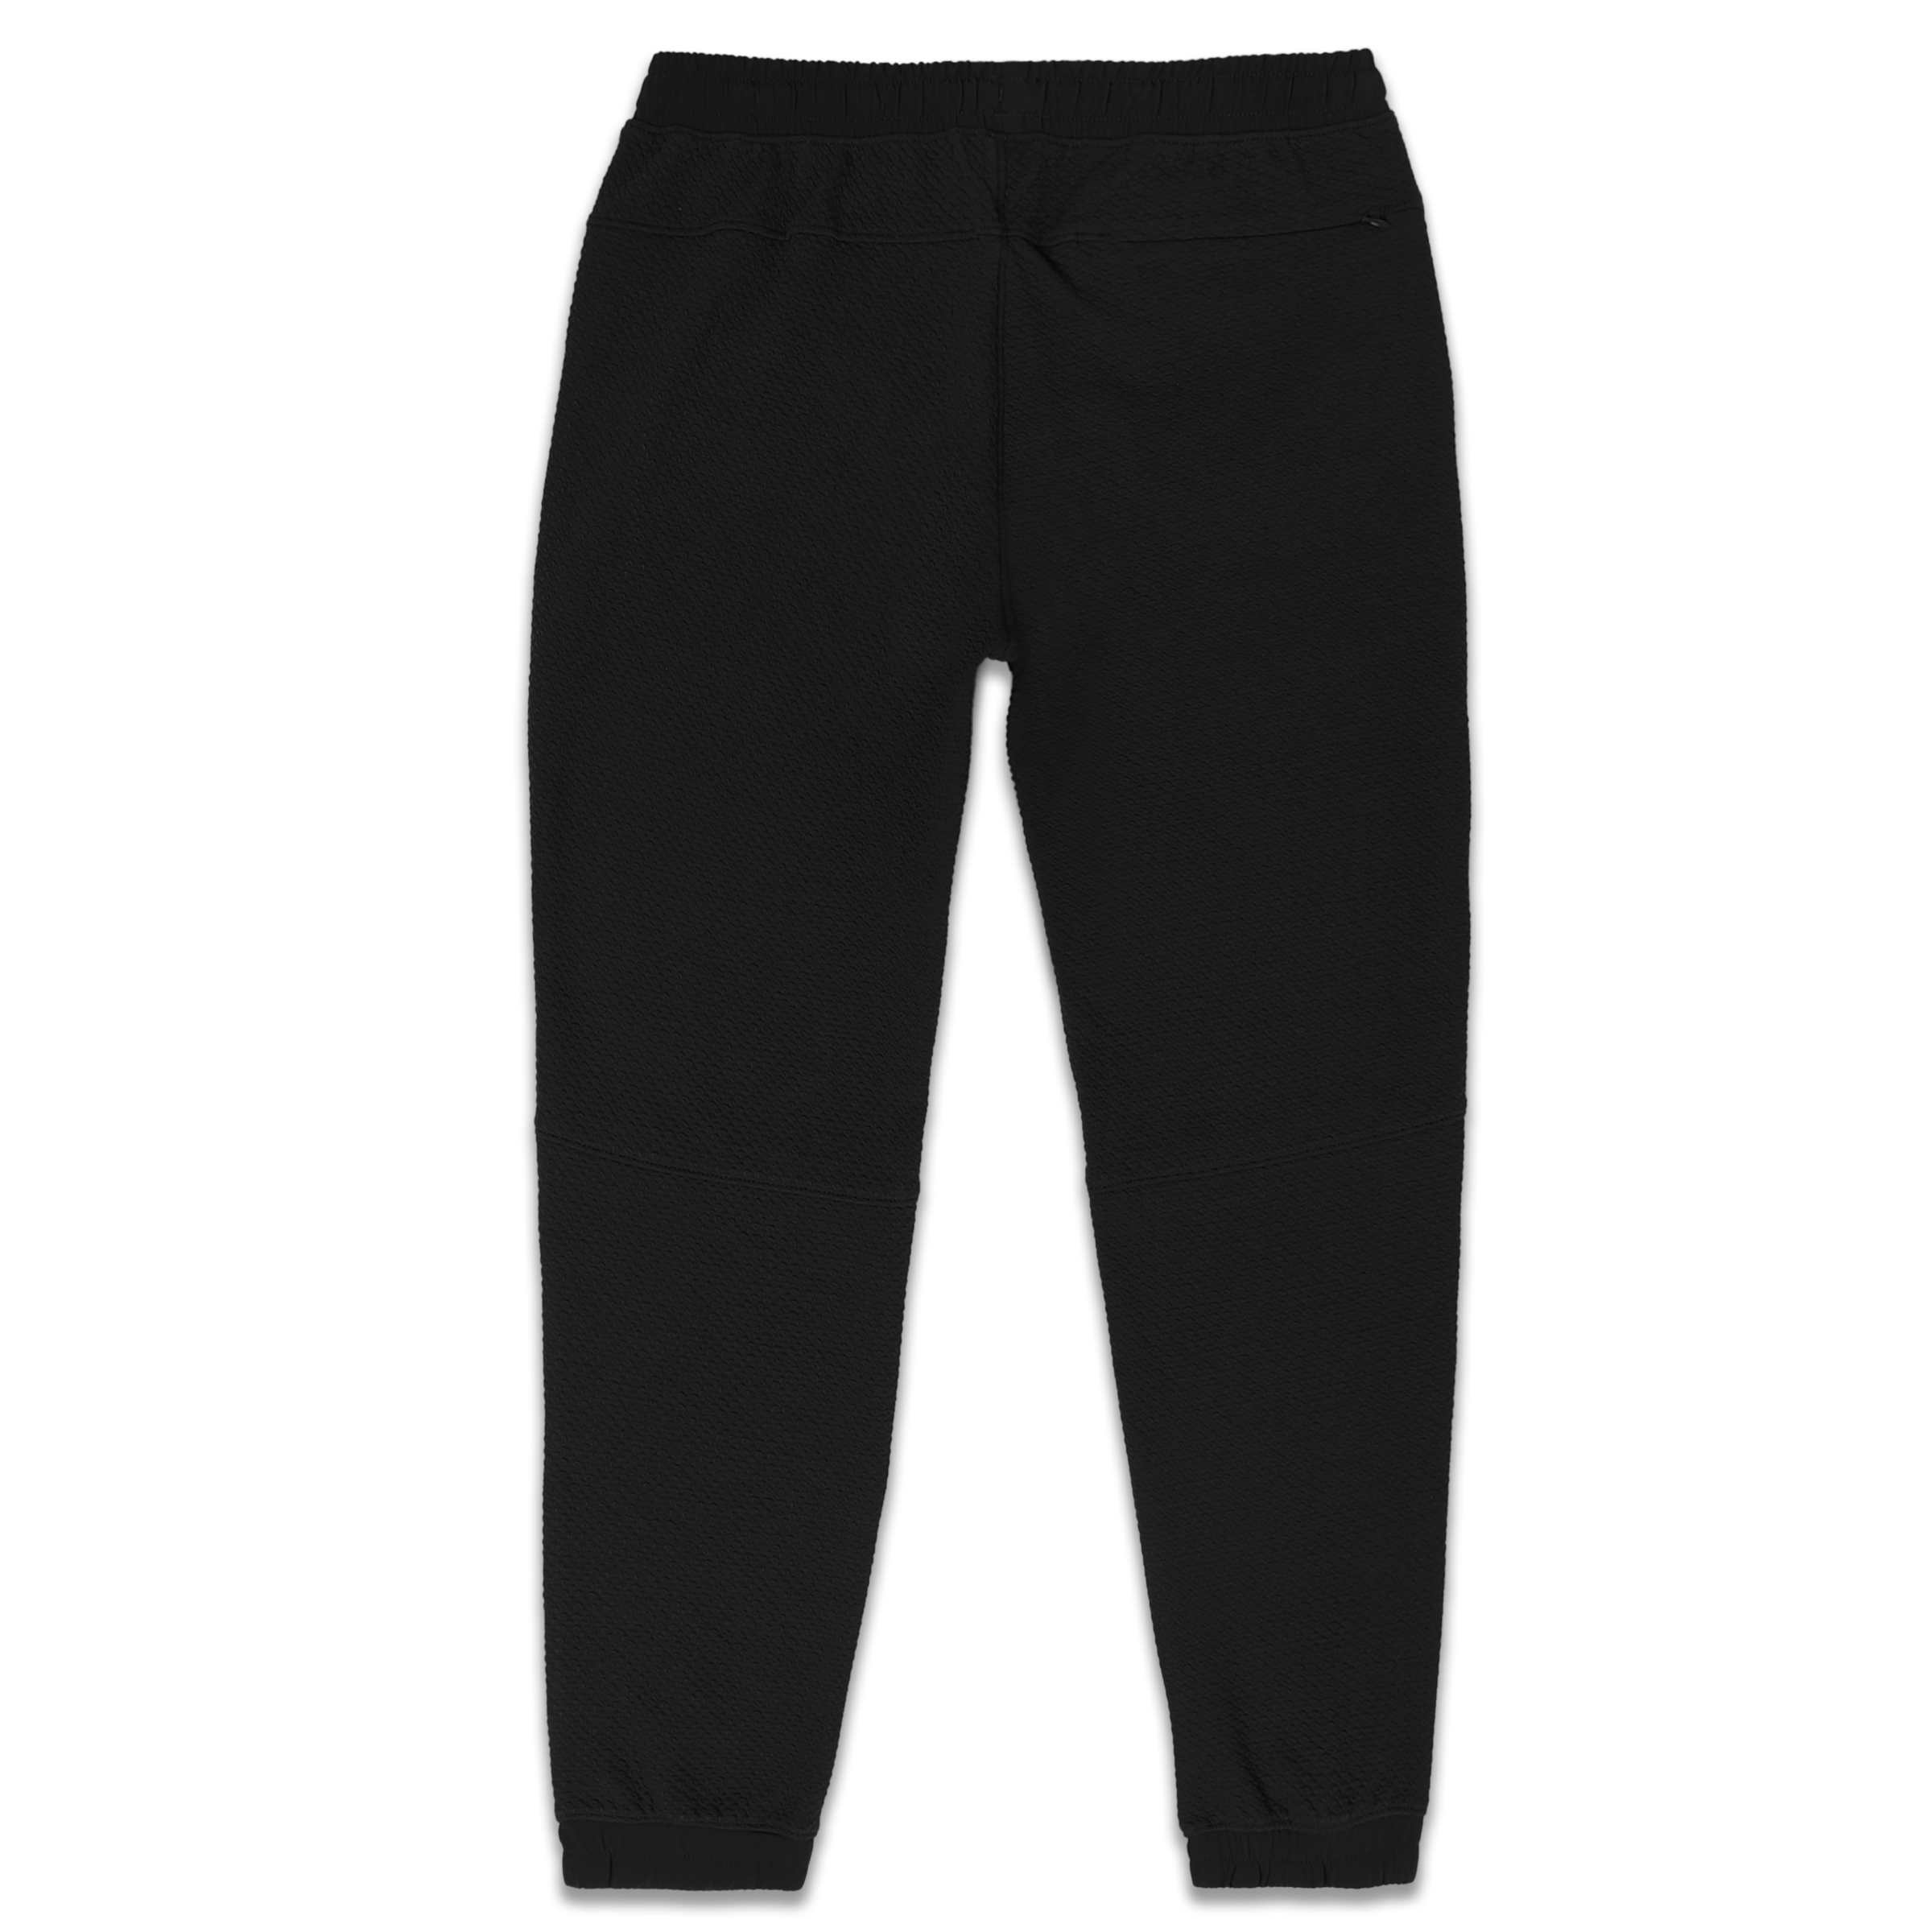 Roam Jogger Black back with an elastic waistband, back right zipper pocket, and ribbed ankle cuffs